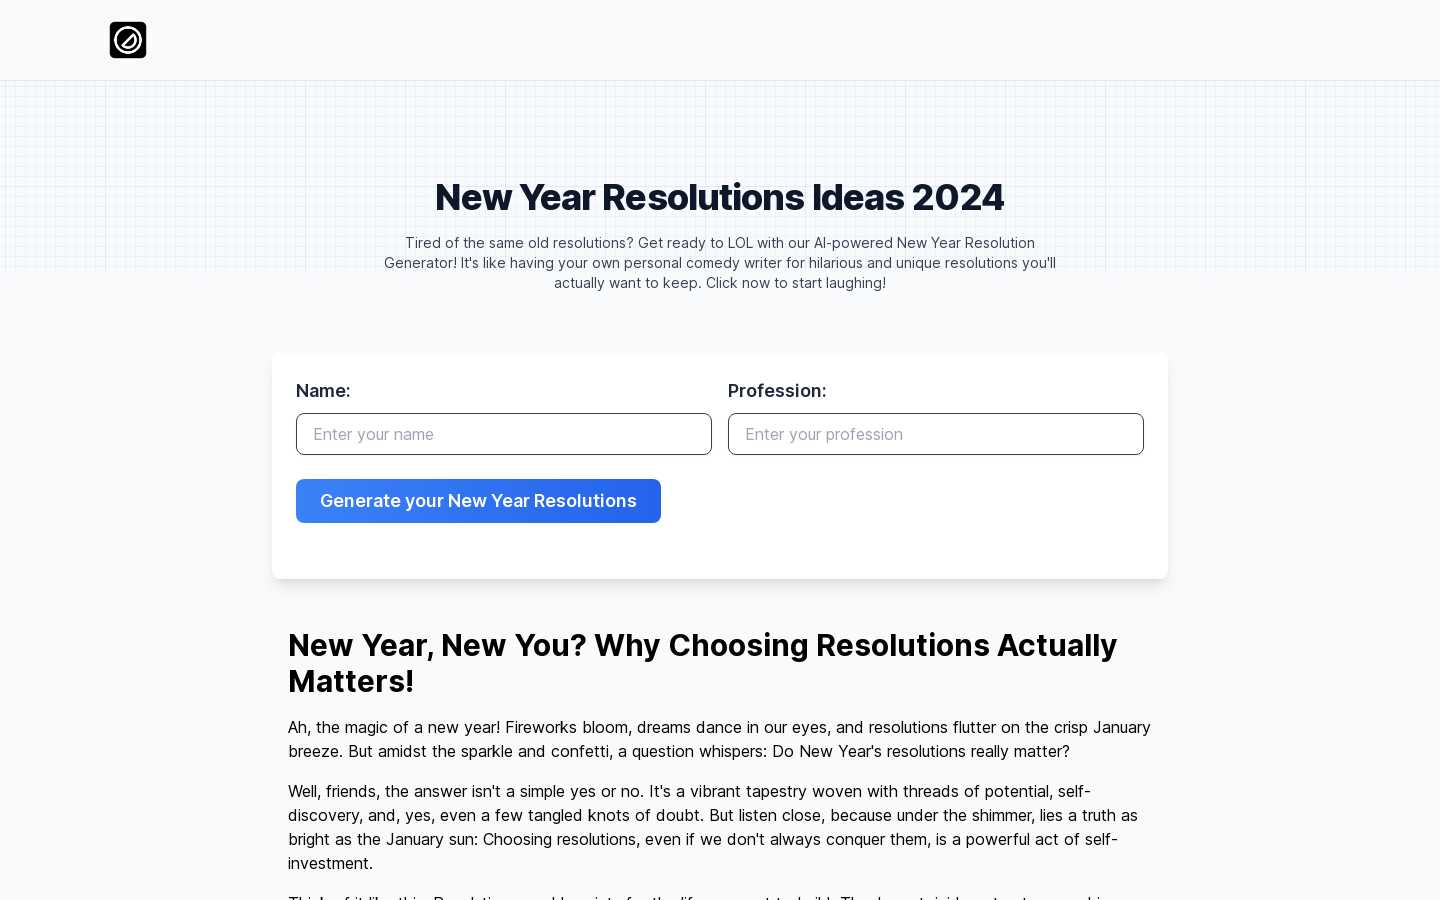 New Year Resolutions Ideas 2024